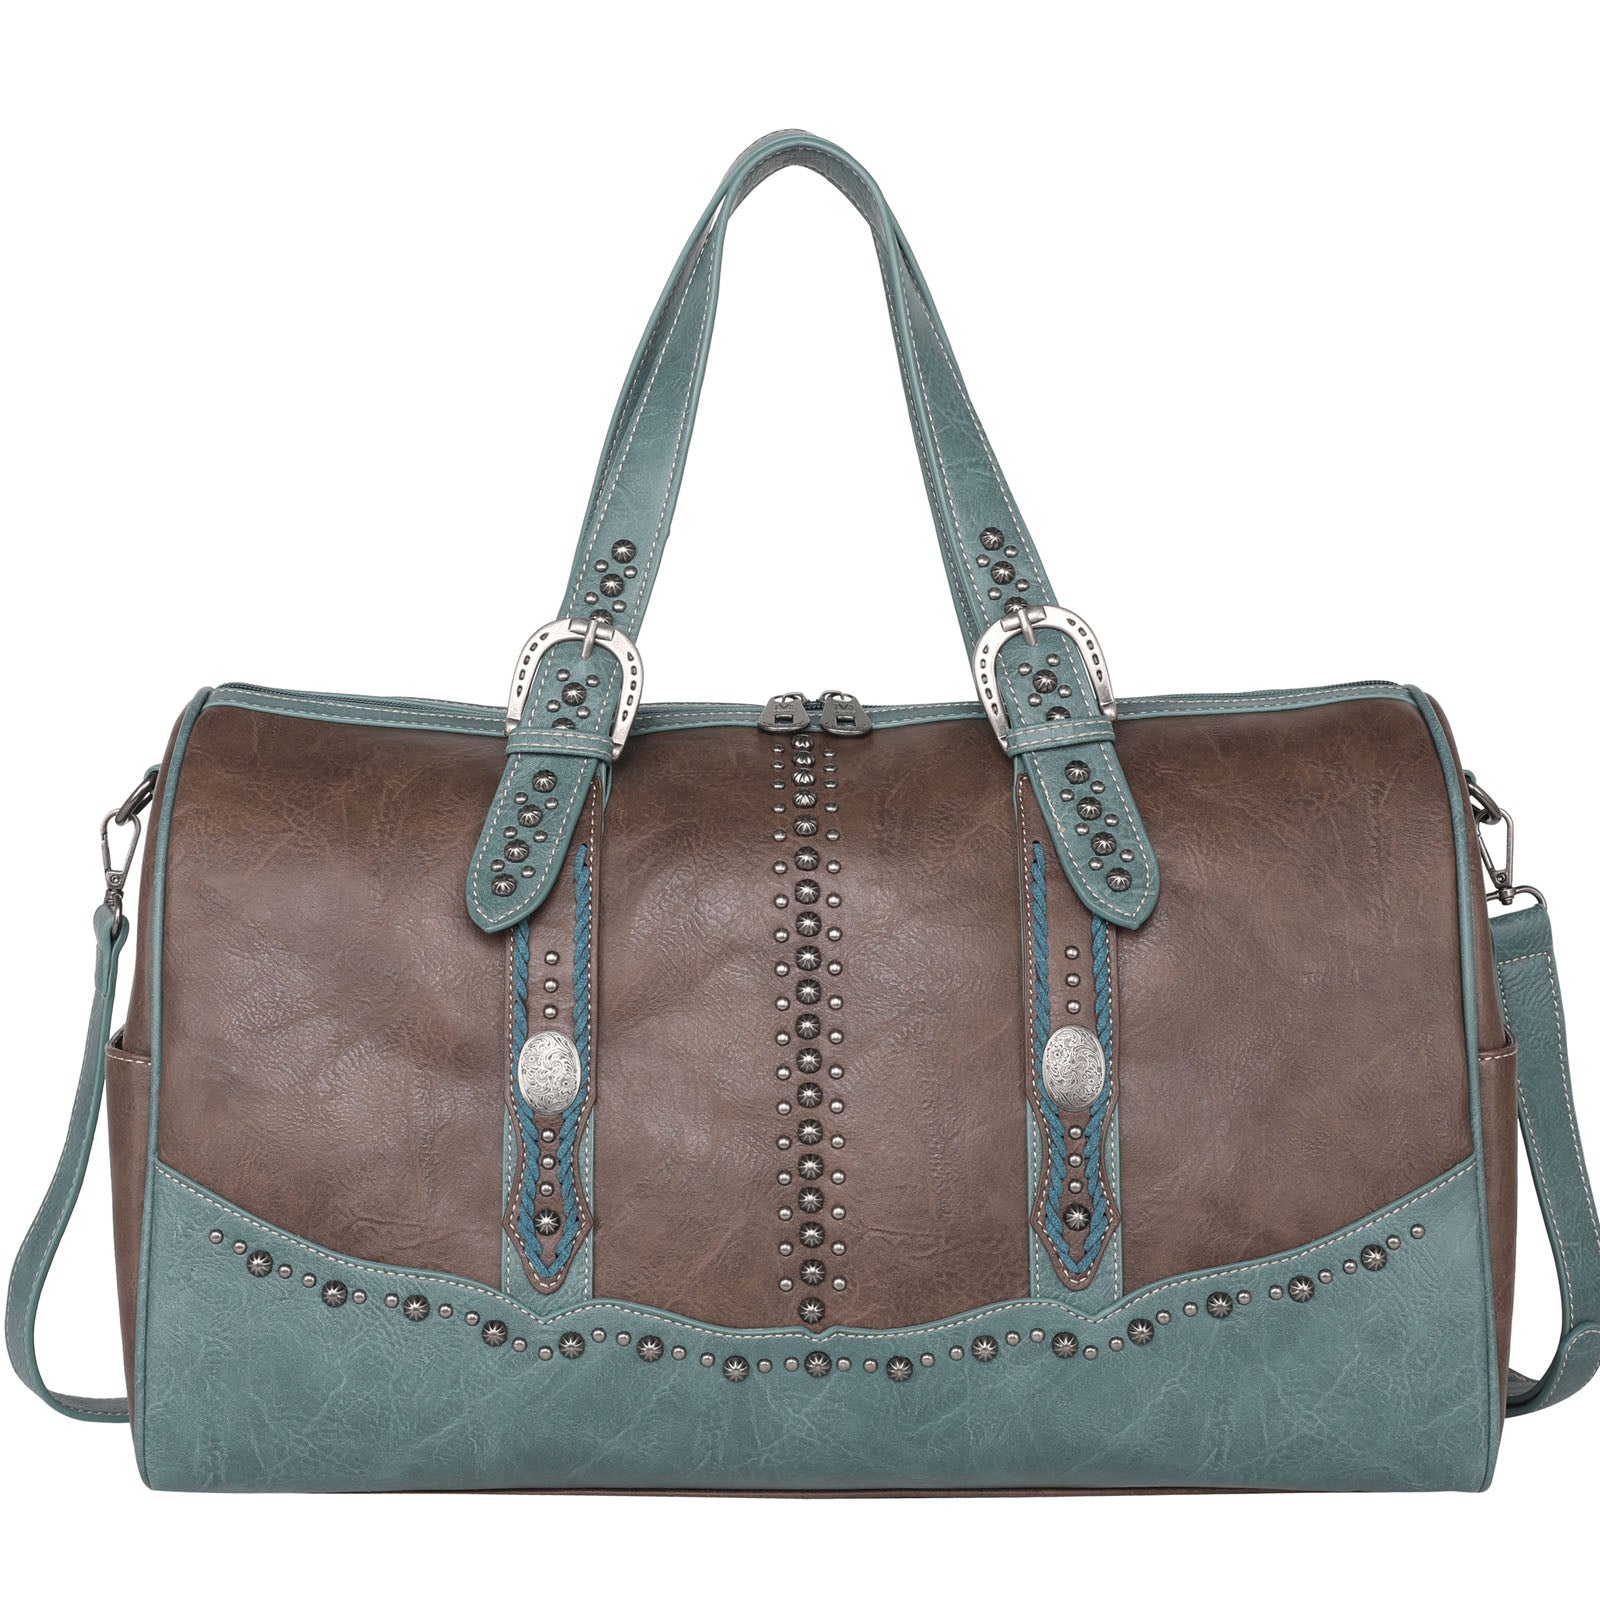 Montana West Buckle Collection Weekender Bag - Cowgirl Wear